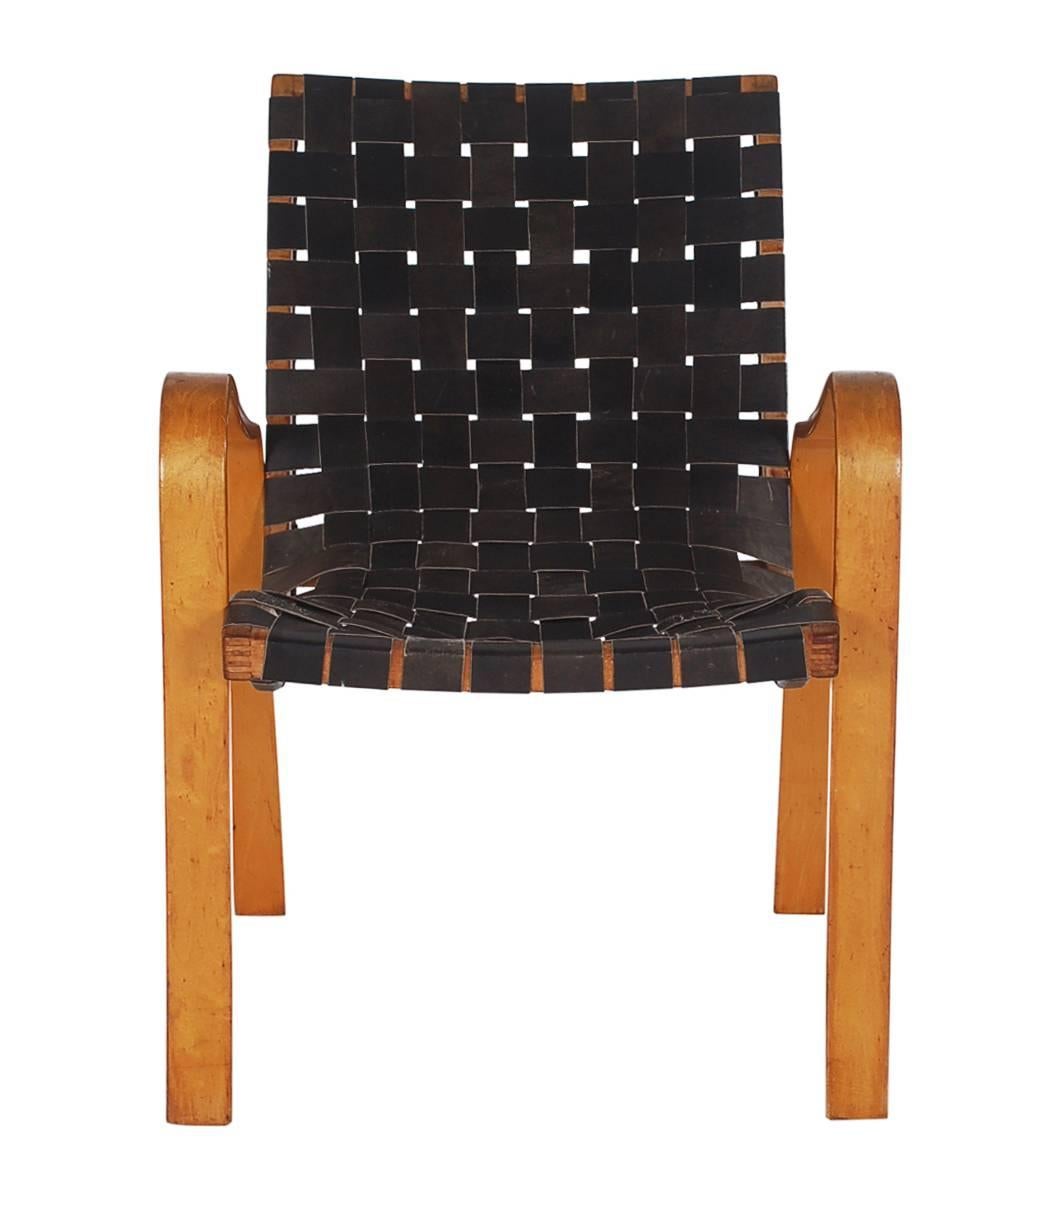 A handsome sitting chair attributed to Bruno Mathsson or Michael Thonet. It features a bent plywood birch frame with black leather straps. All original with exceptional patina.